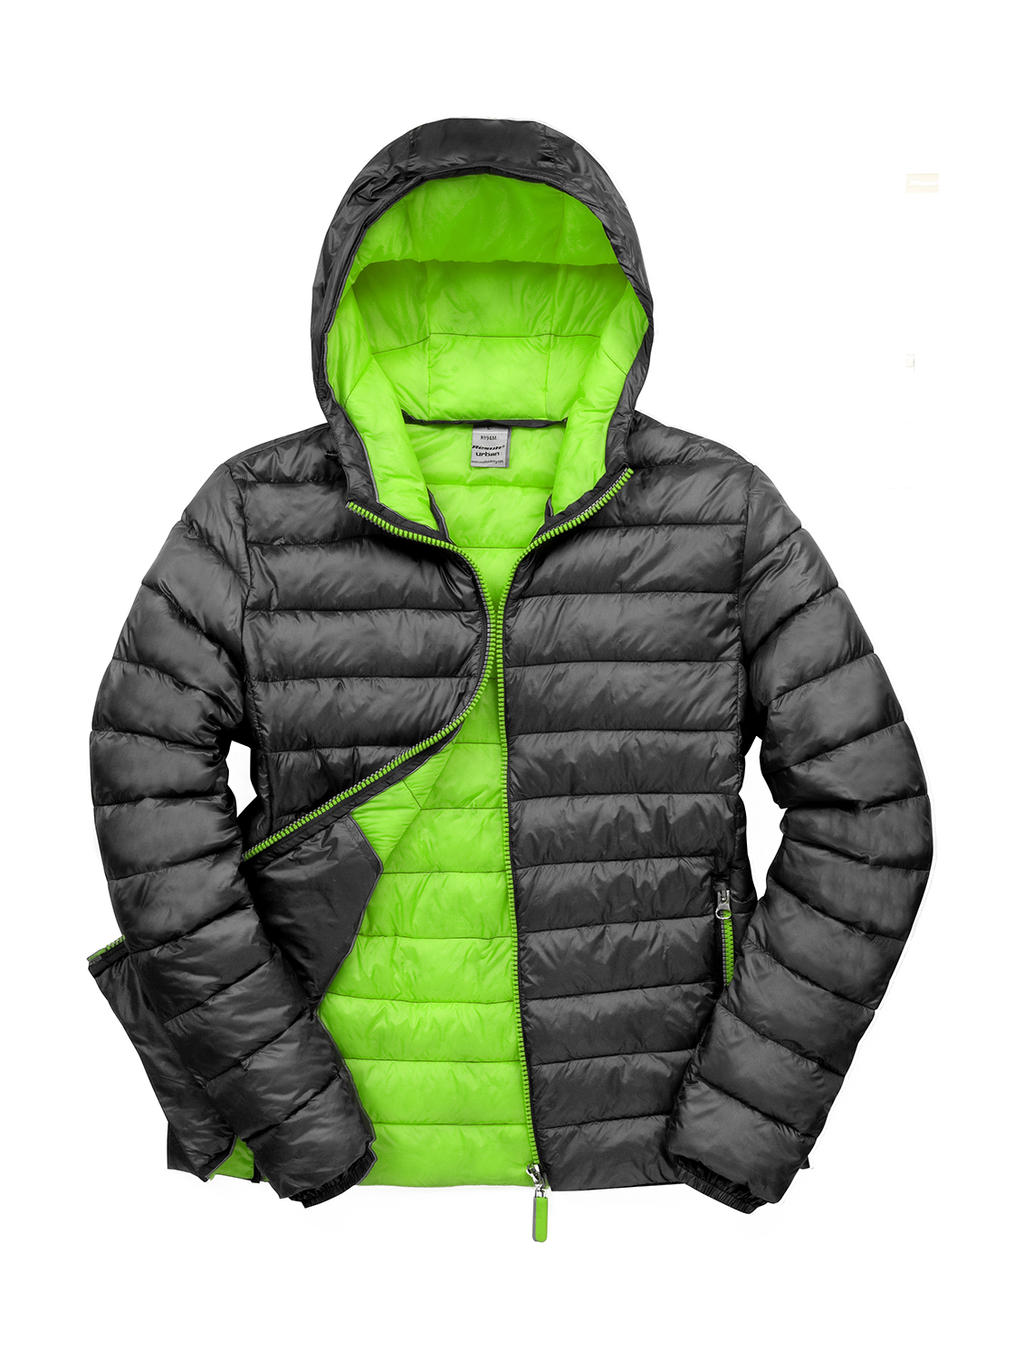  Snow Bird Hooded Jacket in Farbe Black/Lime